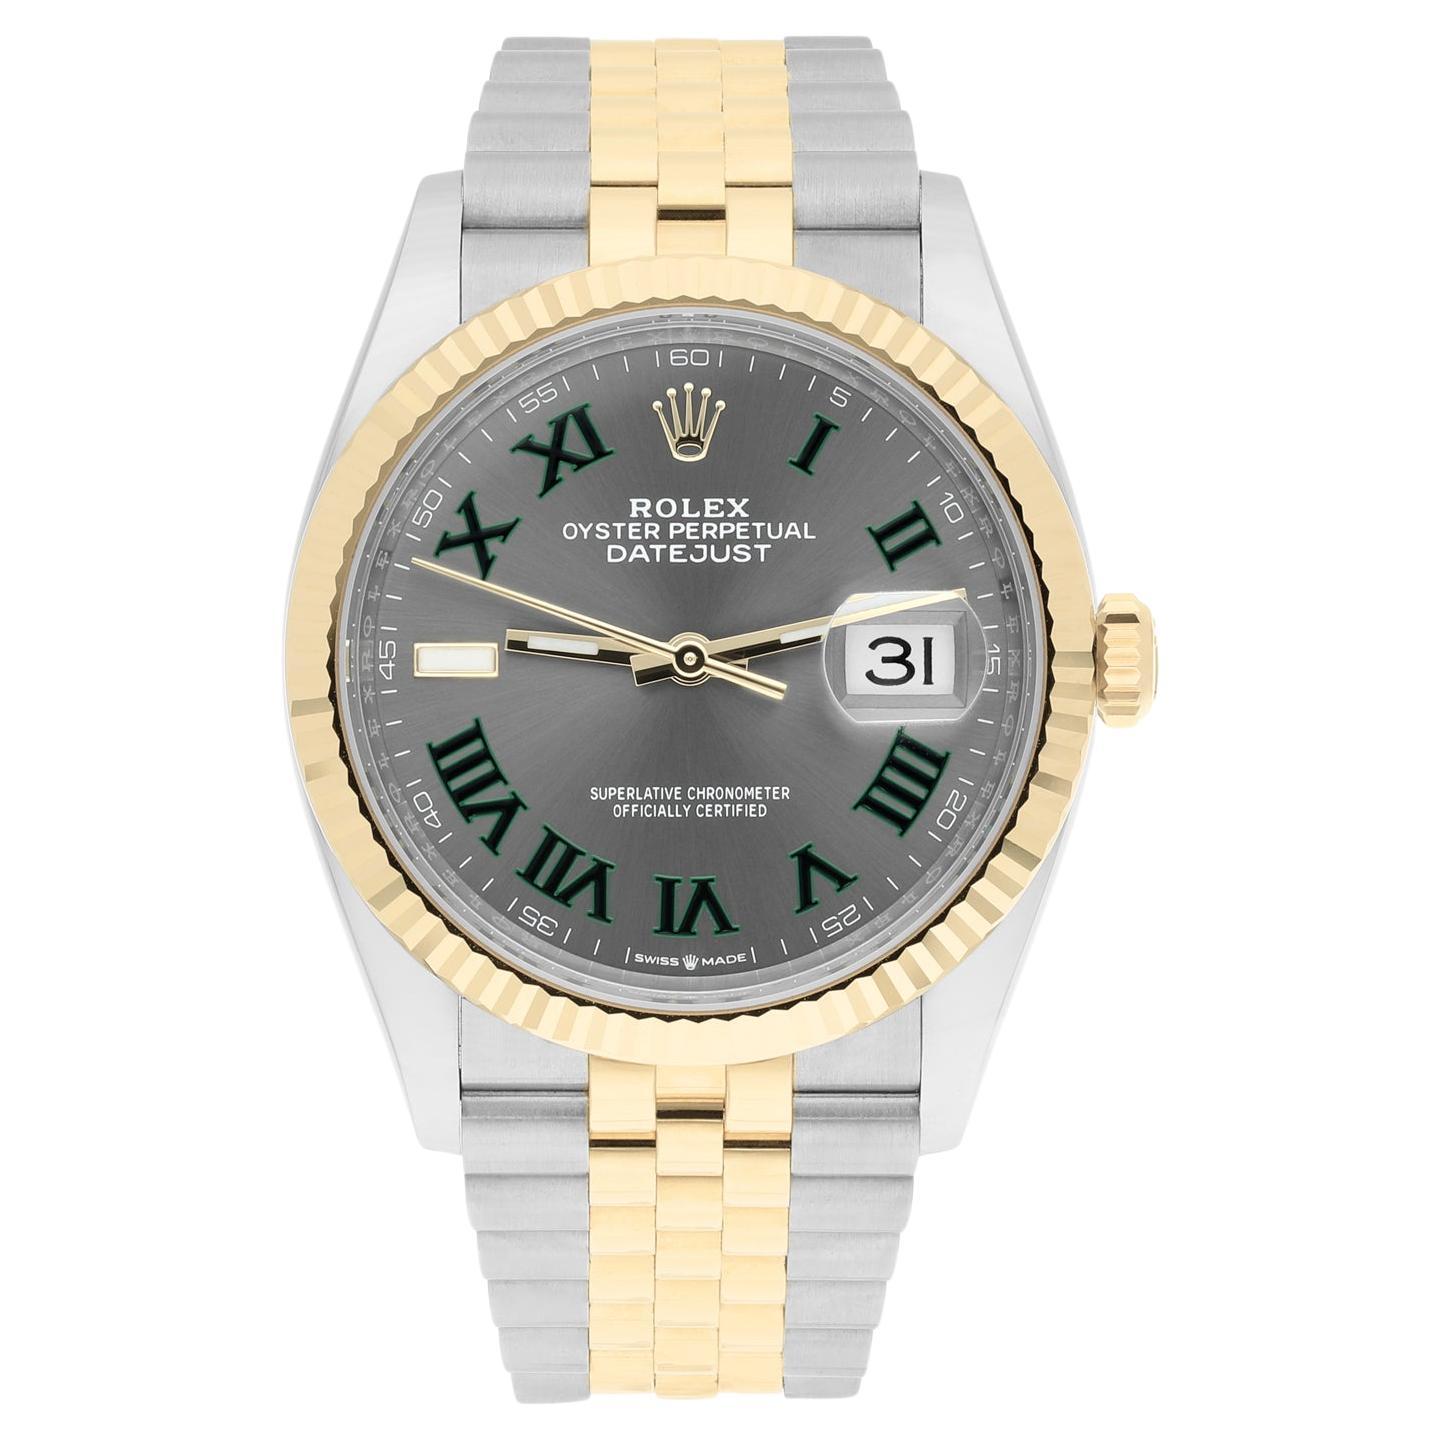 Discover timeless sophistication with the Rolex 126233 Datejust. This 36mm masterpiece features a stunning two-tone yellow gold design with a distinctive fluted bezel and an elegant Wimbledon dial.Never worn and accompanied by its original box and